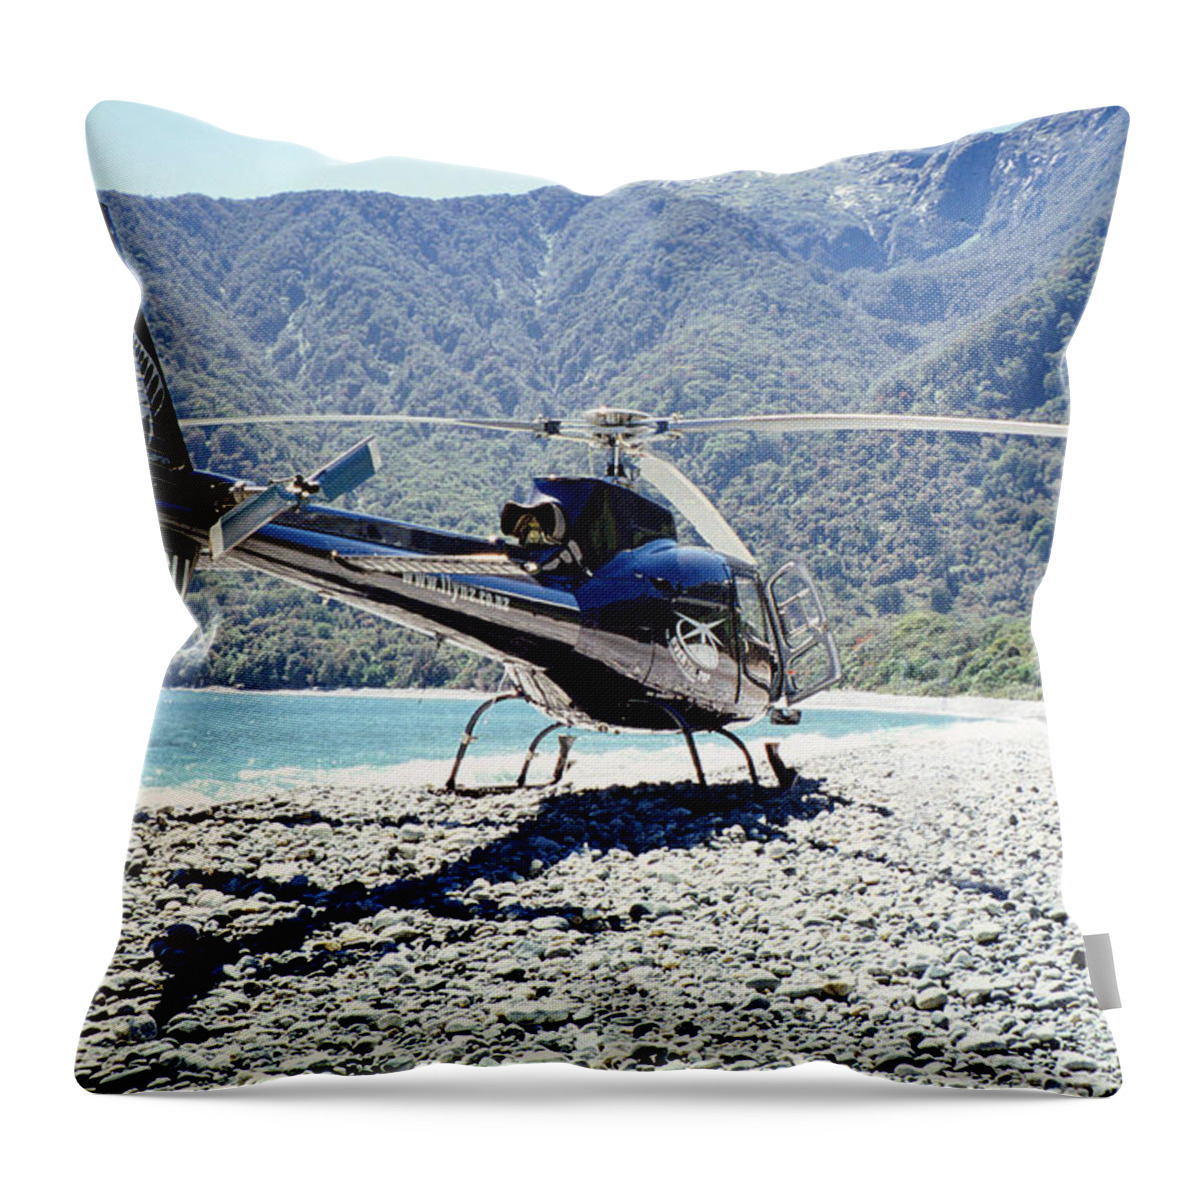 New Zealand Nature Throw Pillow featuring the photograph Aerospatiale Ecureuil 350, New Zealand by Wernher Krutein